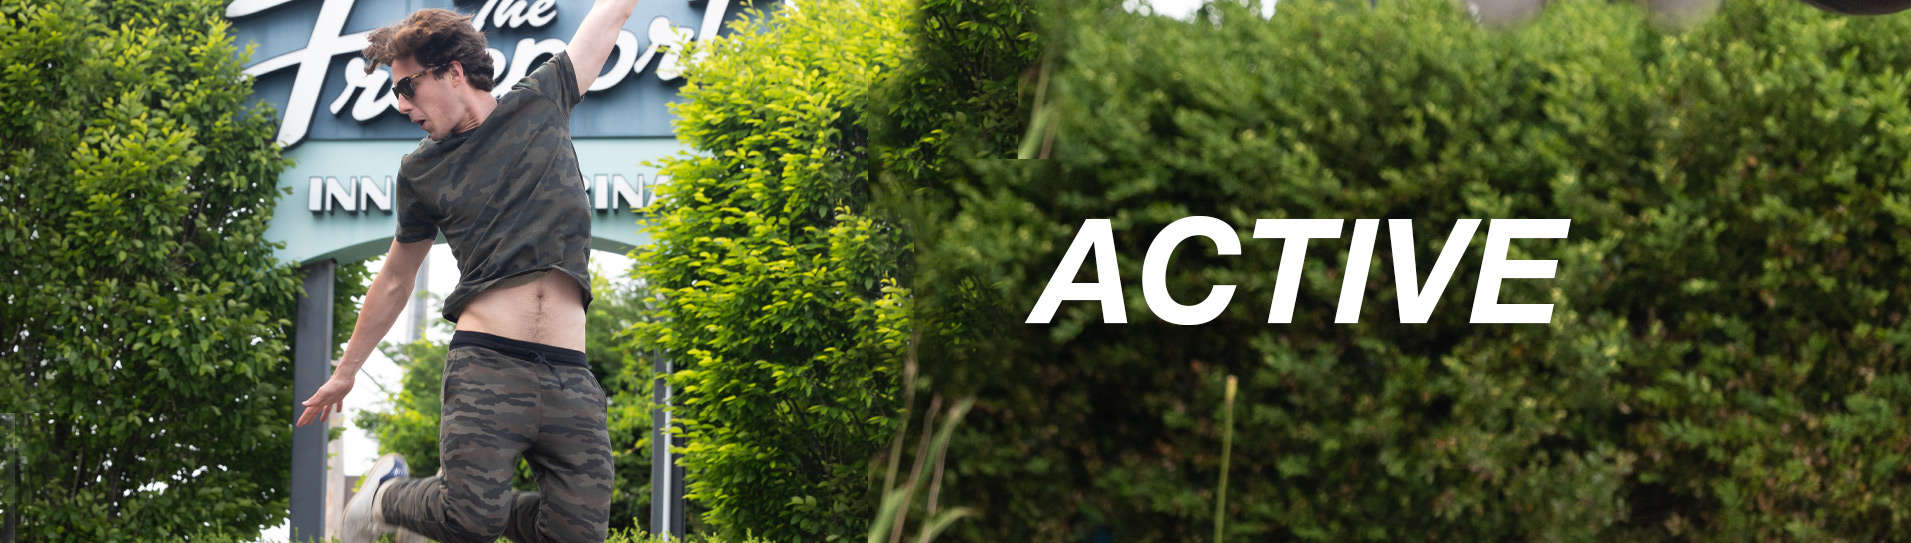 Activewear Collection Banner